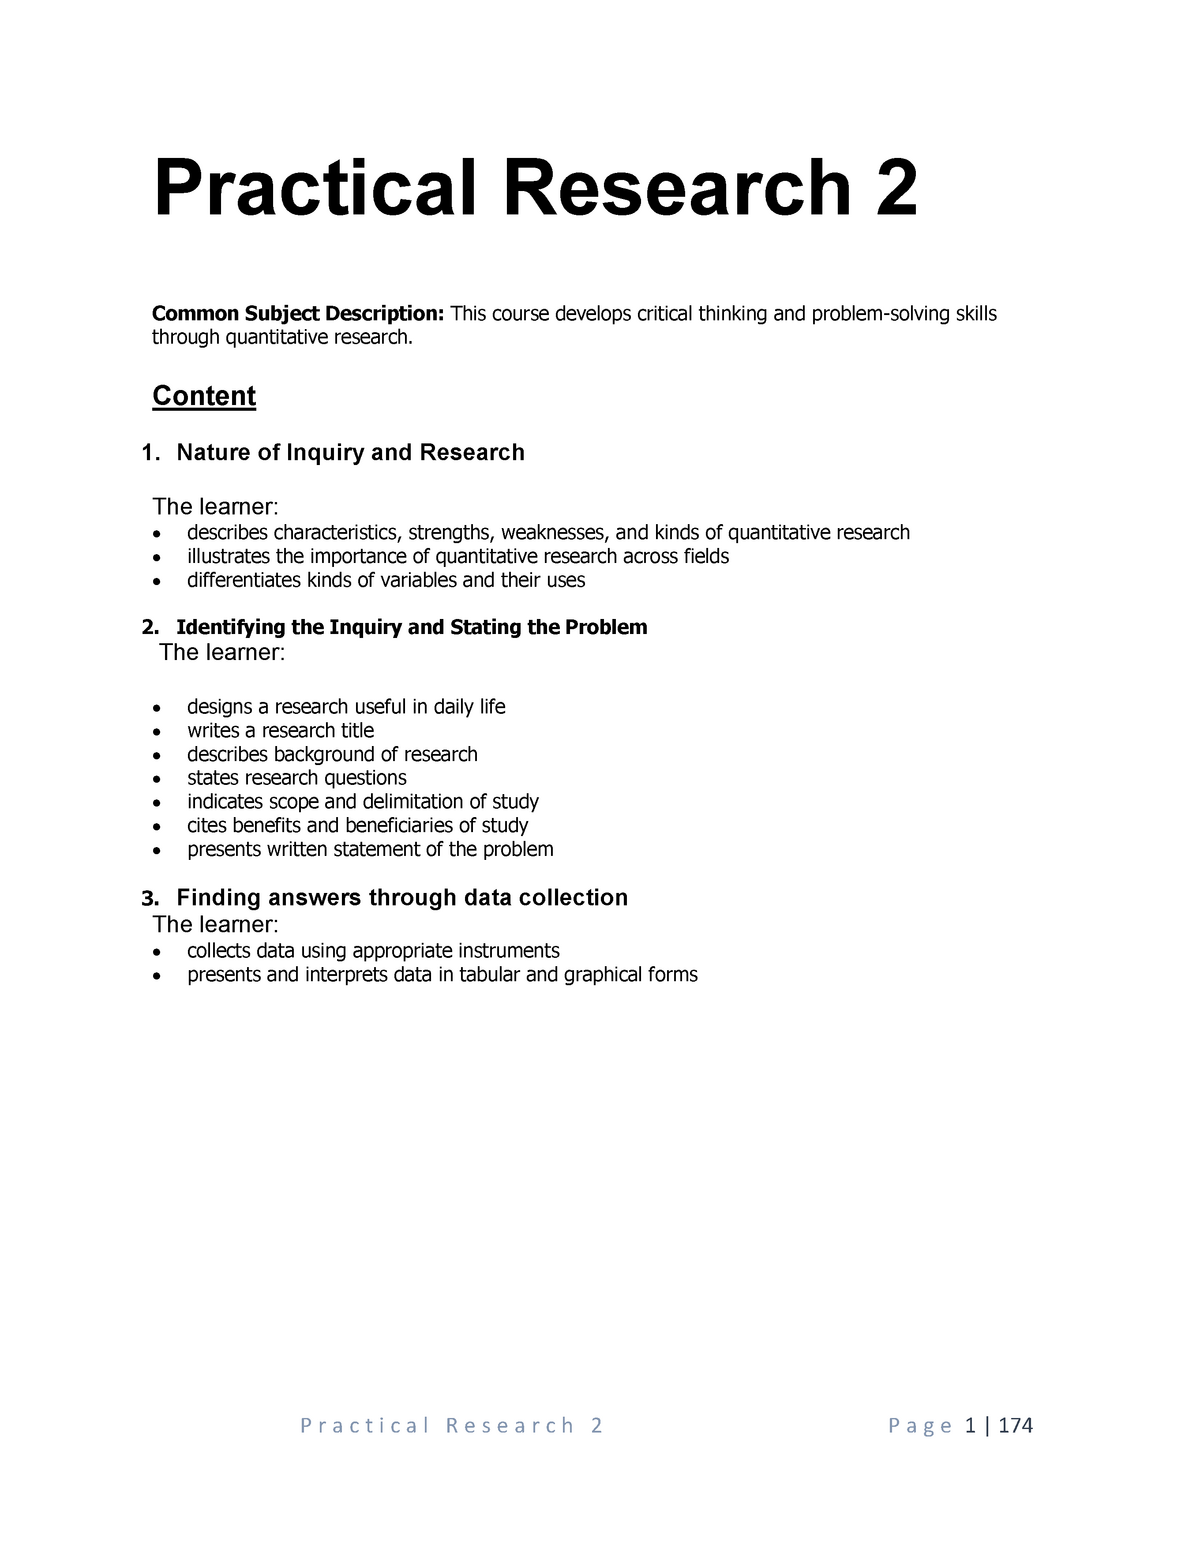 essay about practical research 2